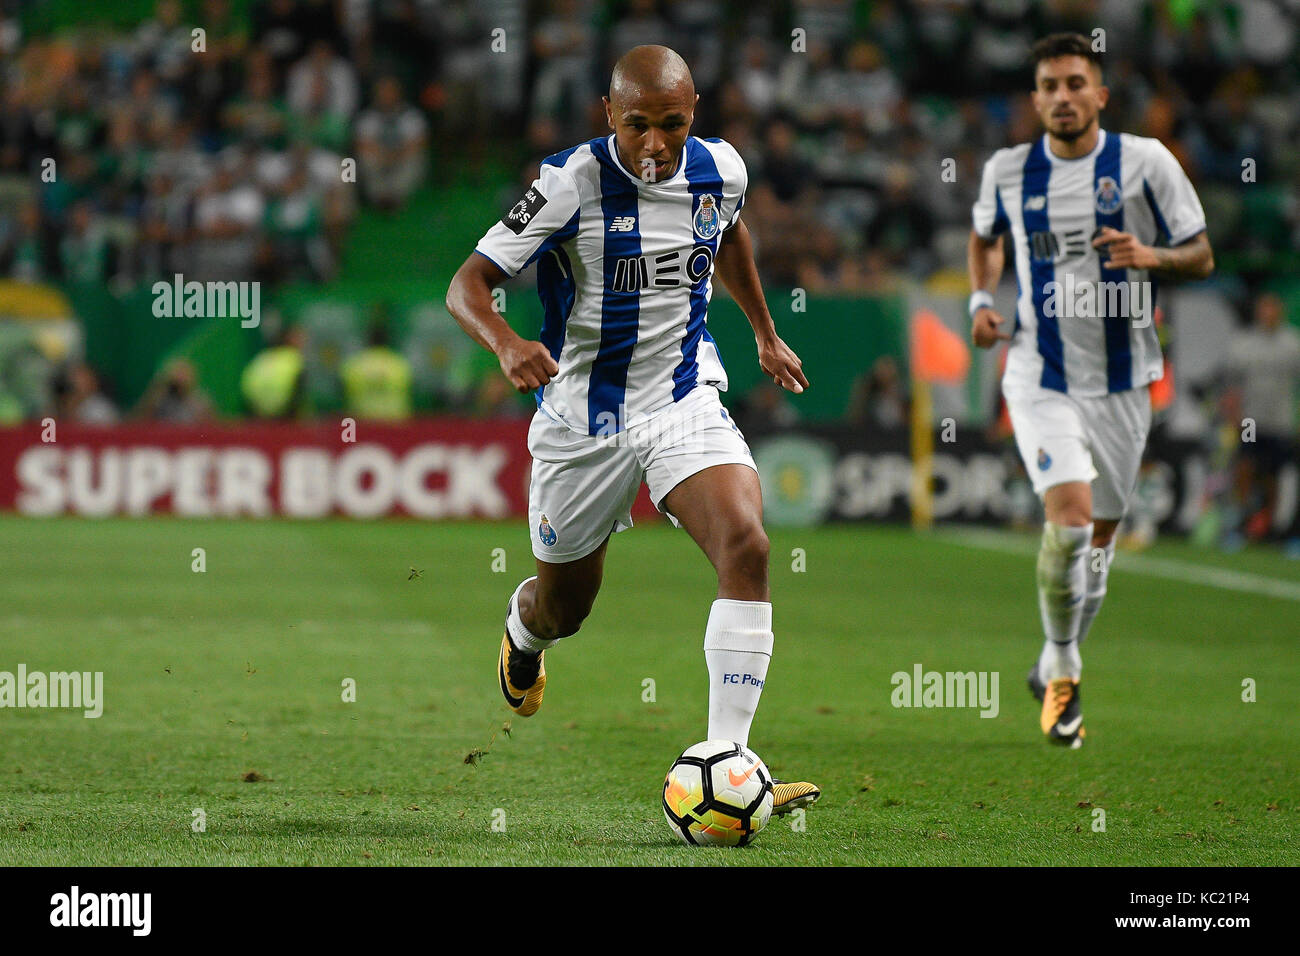 Portugal, Lisbon, 01.10.2017 - PORTUGUESE LEAGUE: SPORTING CP x FC PORTO - Yacine Brahimi from FC Porto in action during Portuguese League, Liga NOS, football match between Sporting CP and FC Porto in Alvalade Stadium on October 01, 2017 in Lisbon, Portugal. Credit: Bruno de Carvalho/Alamy Live News Stock Photo